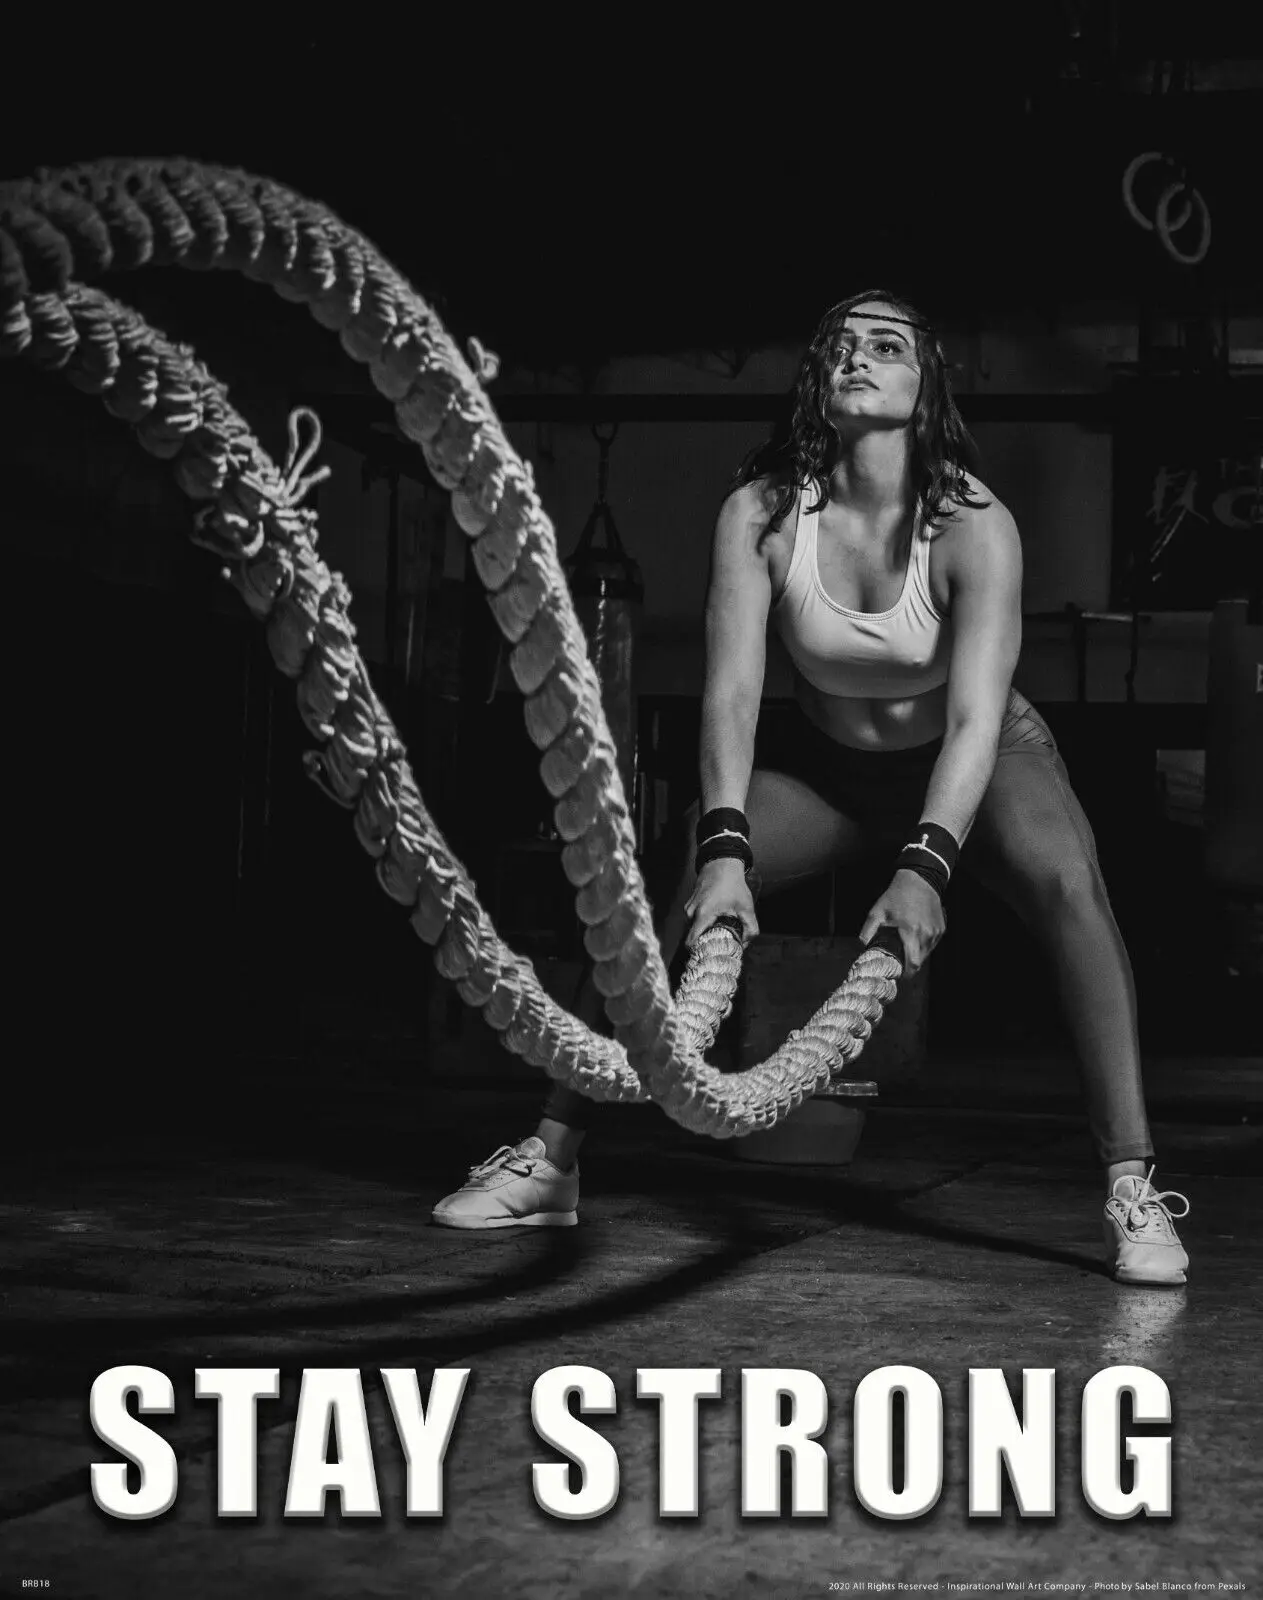 Workout Motivational Women's Fitness Gym Print Art Canvas Poster For Living Room Decor Home Wall Picture muscle bodybuilding fitness canvas art print painting poster wall picture for living room home decorative bedroom decor no frame